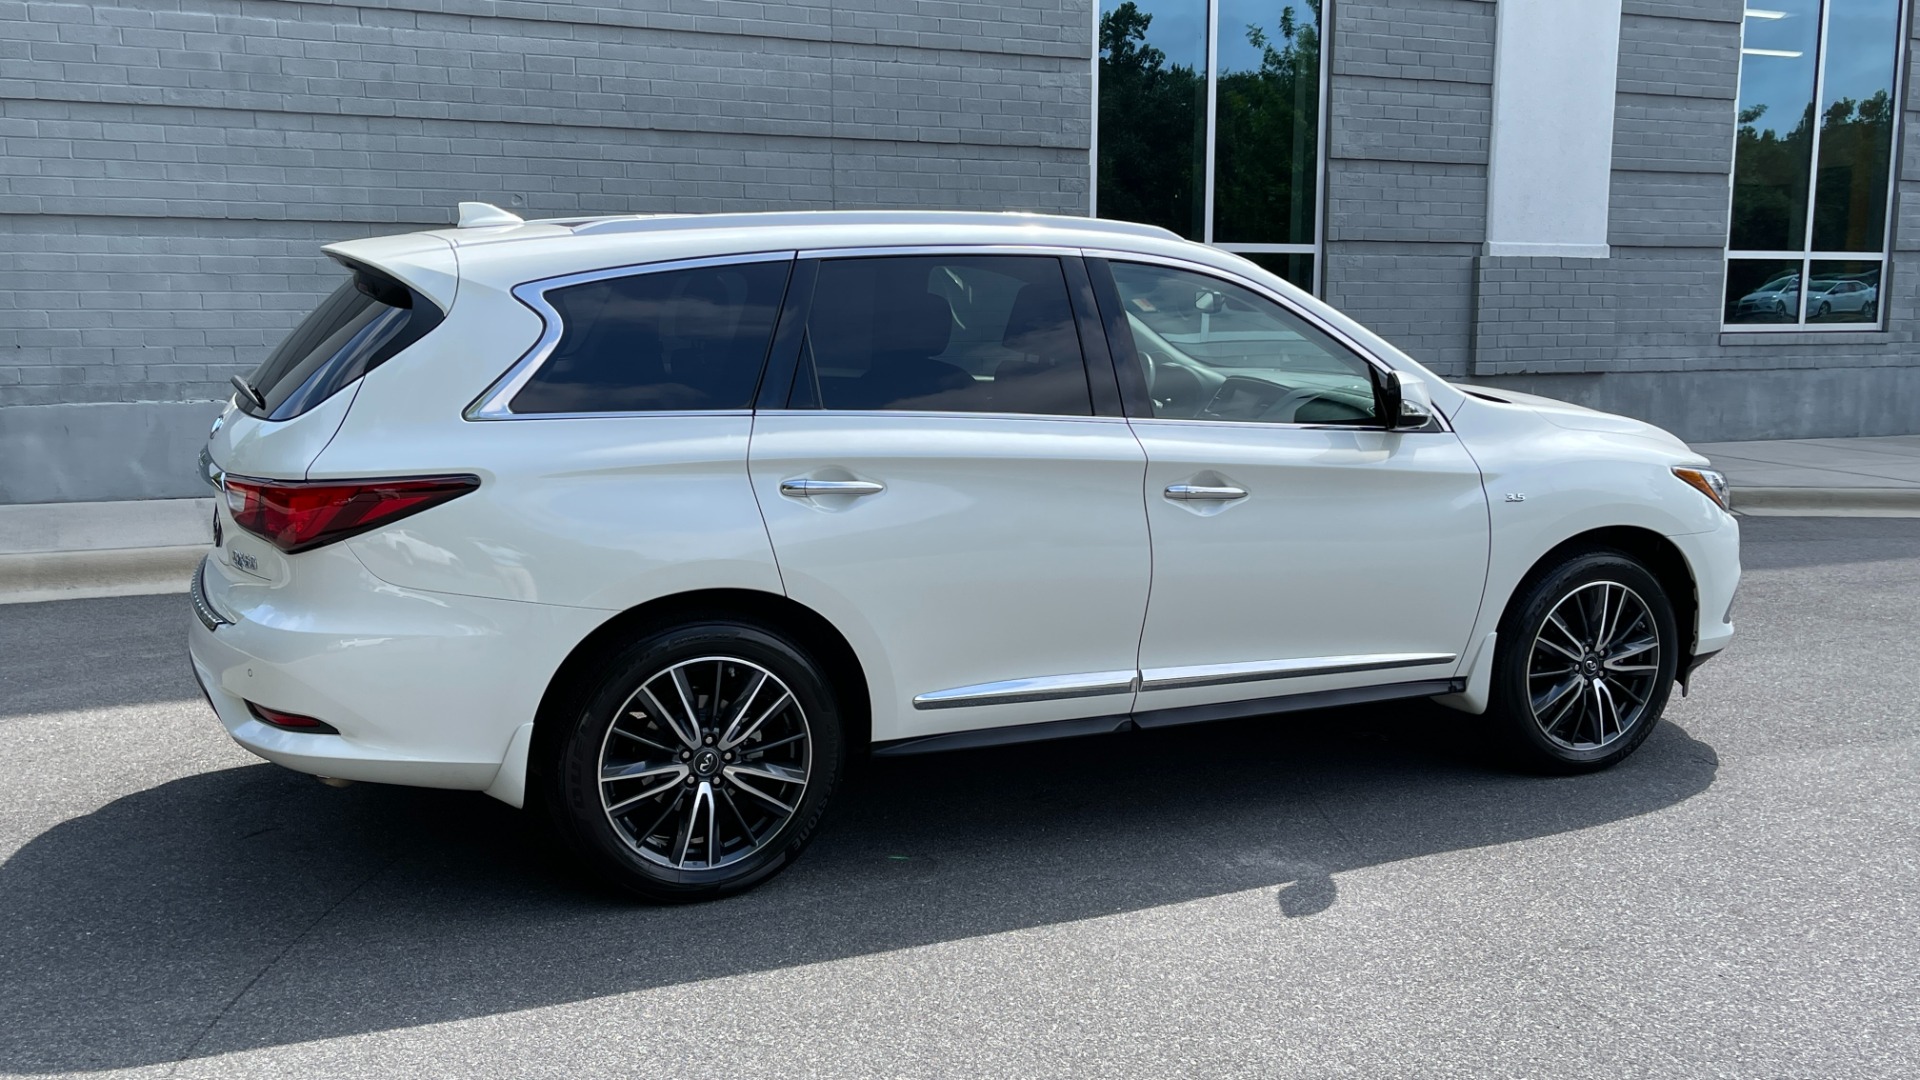 Used 2016 INFINITI QX60 AWD / DVD / 3RD ROW SEATS / DELUXE TECH for sale $27,999 at Formula Imports in Charlotte NC 28227 8